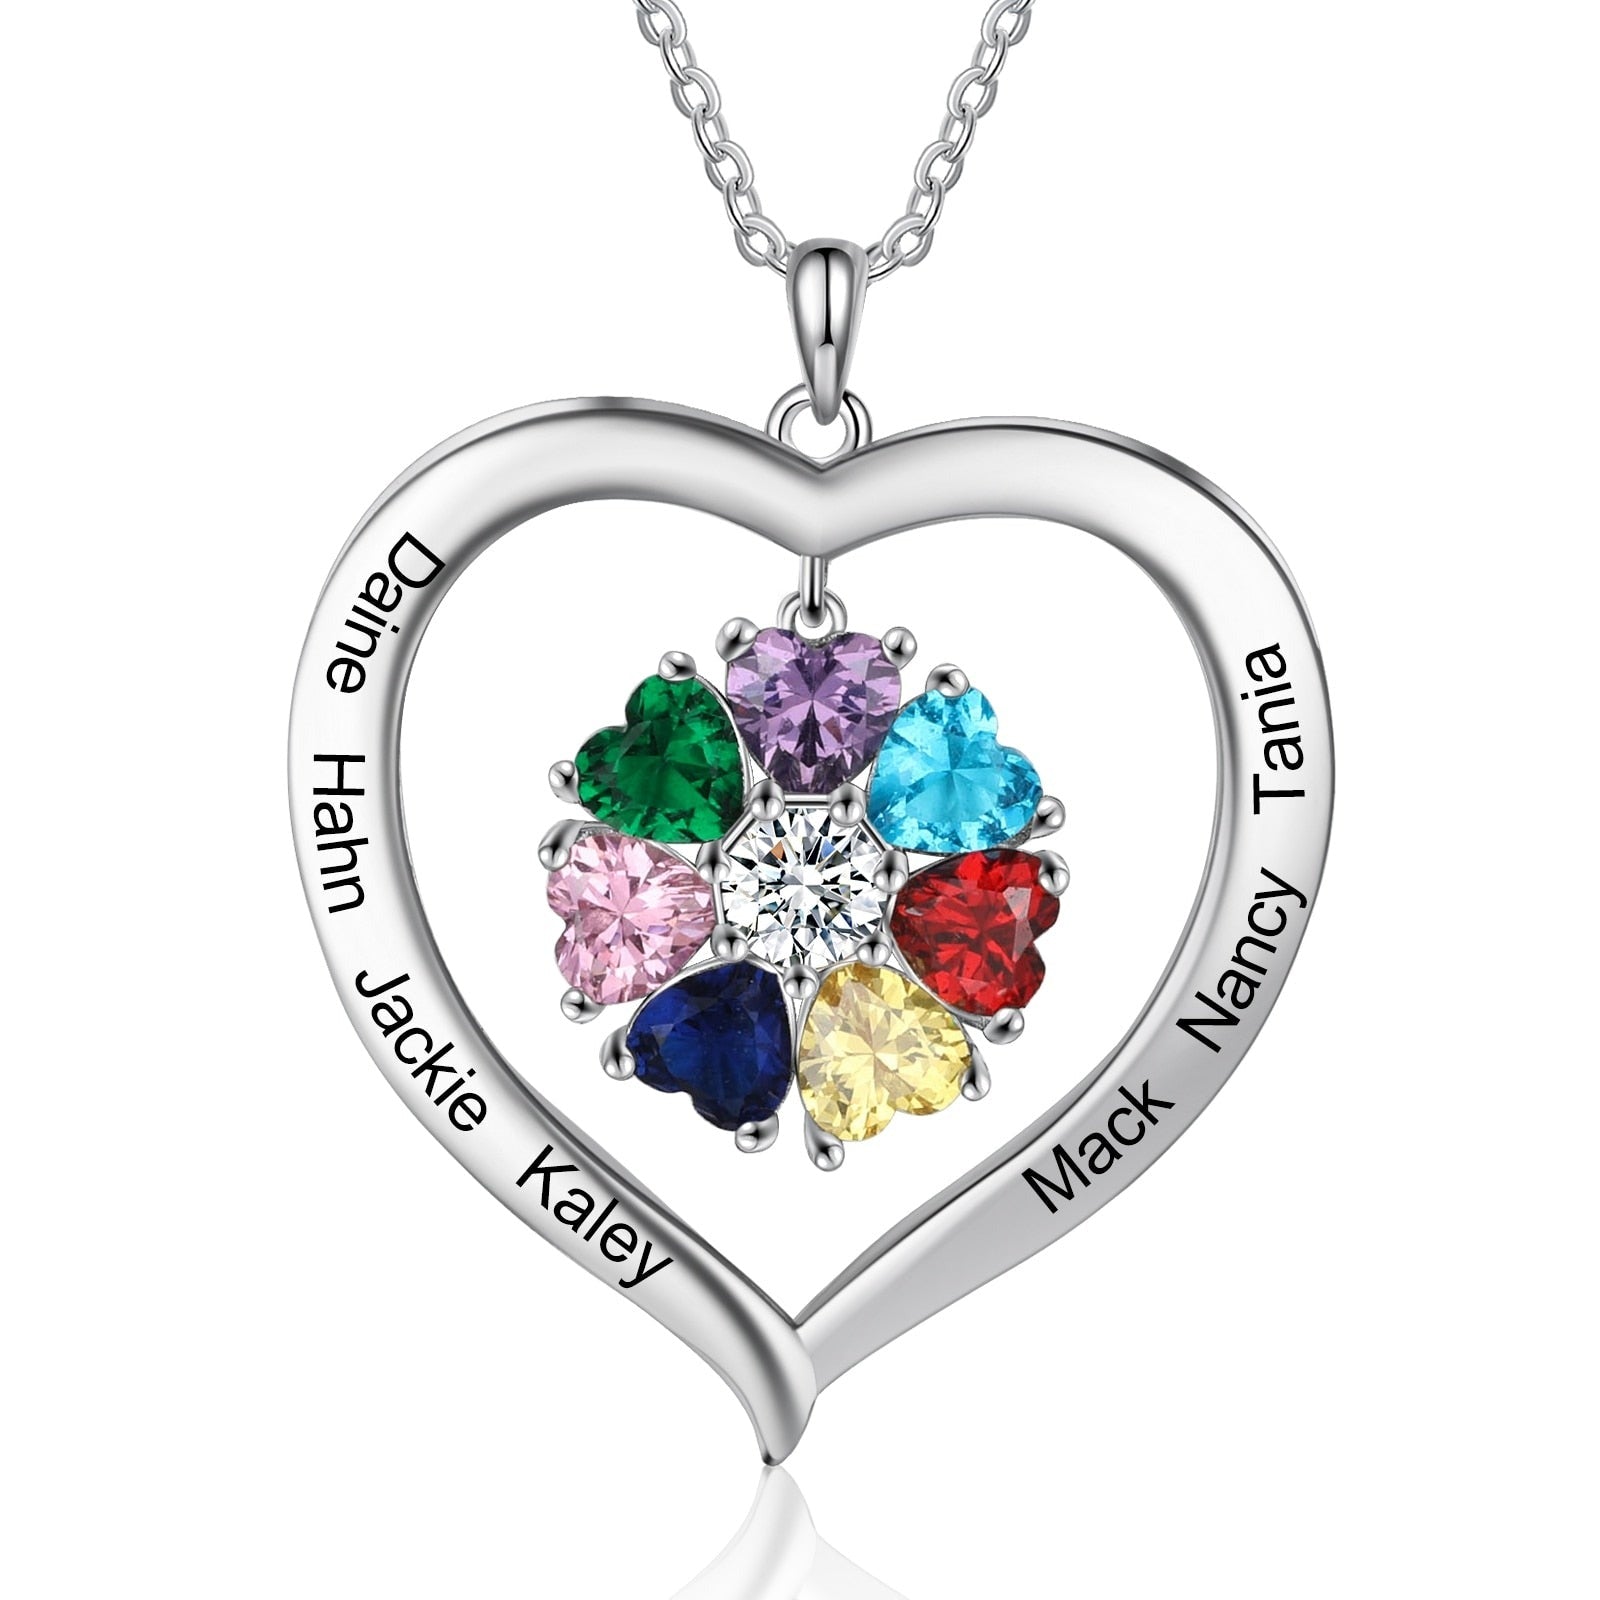 Love Family Customized Pendant Necklace https://shinyjoules.com/collections/necklace